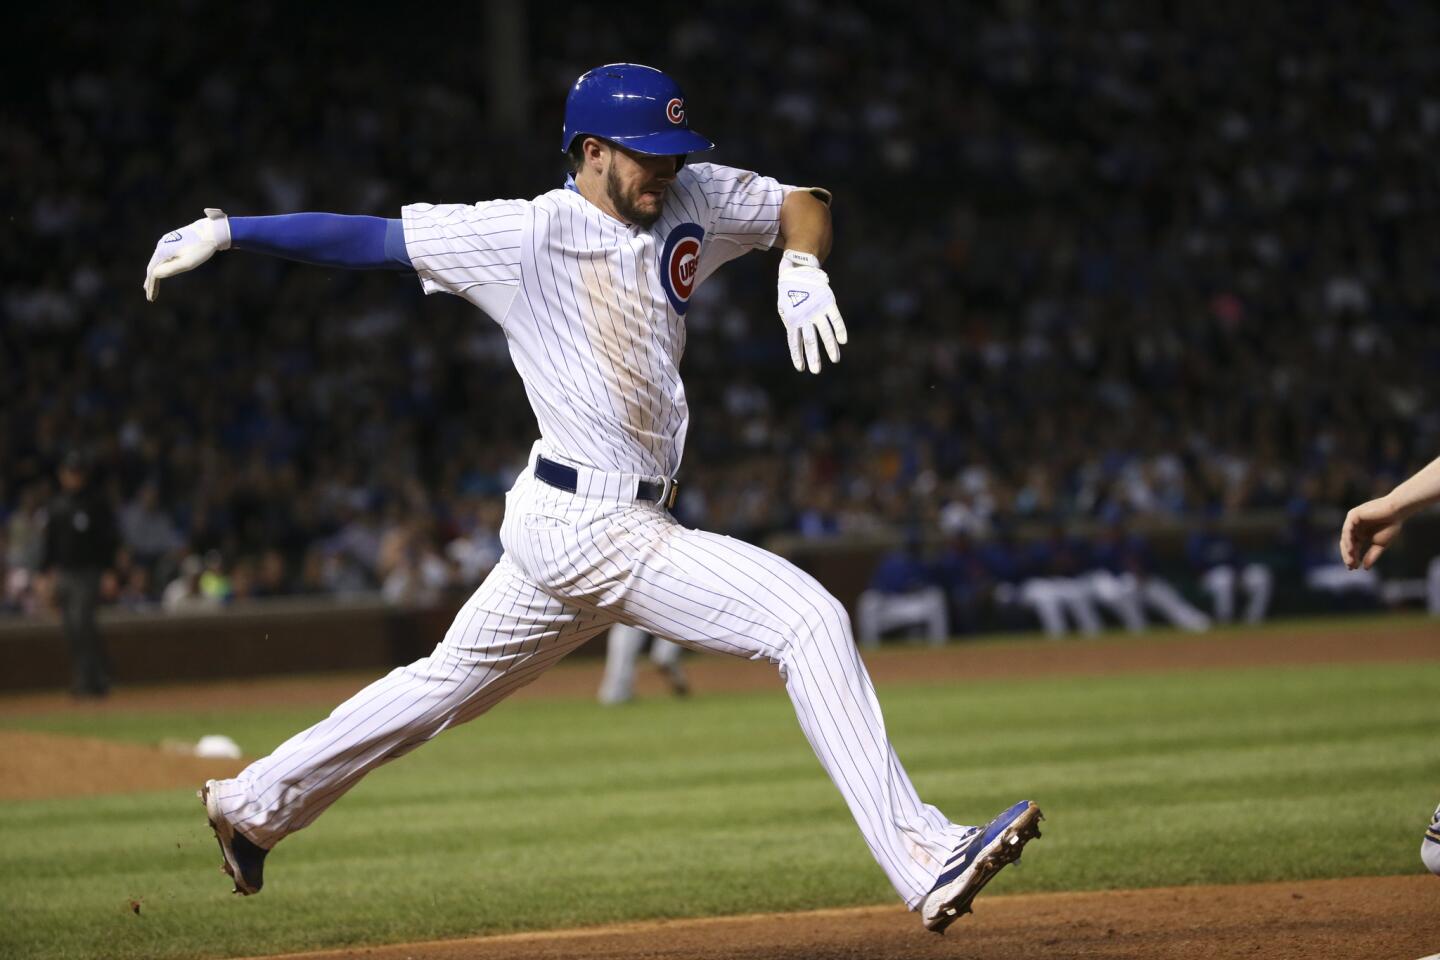 Kris Bryant is out at first in the ninth inning.